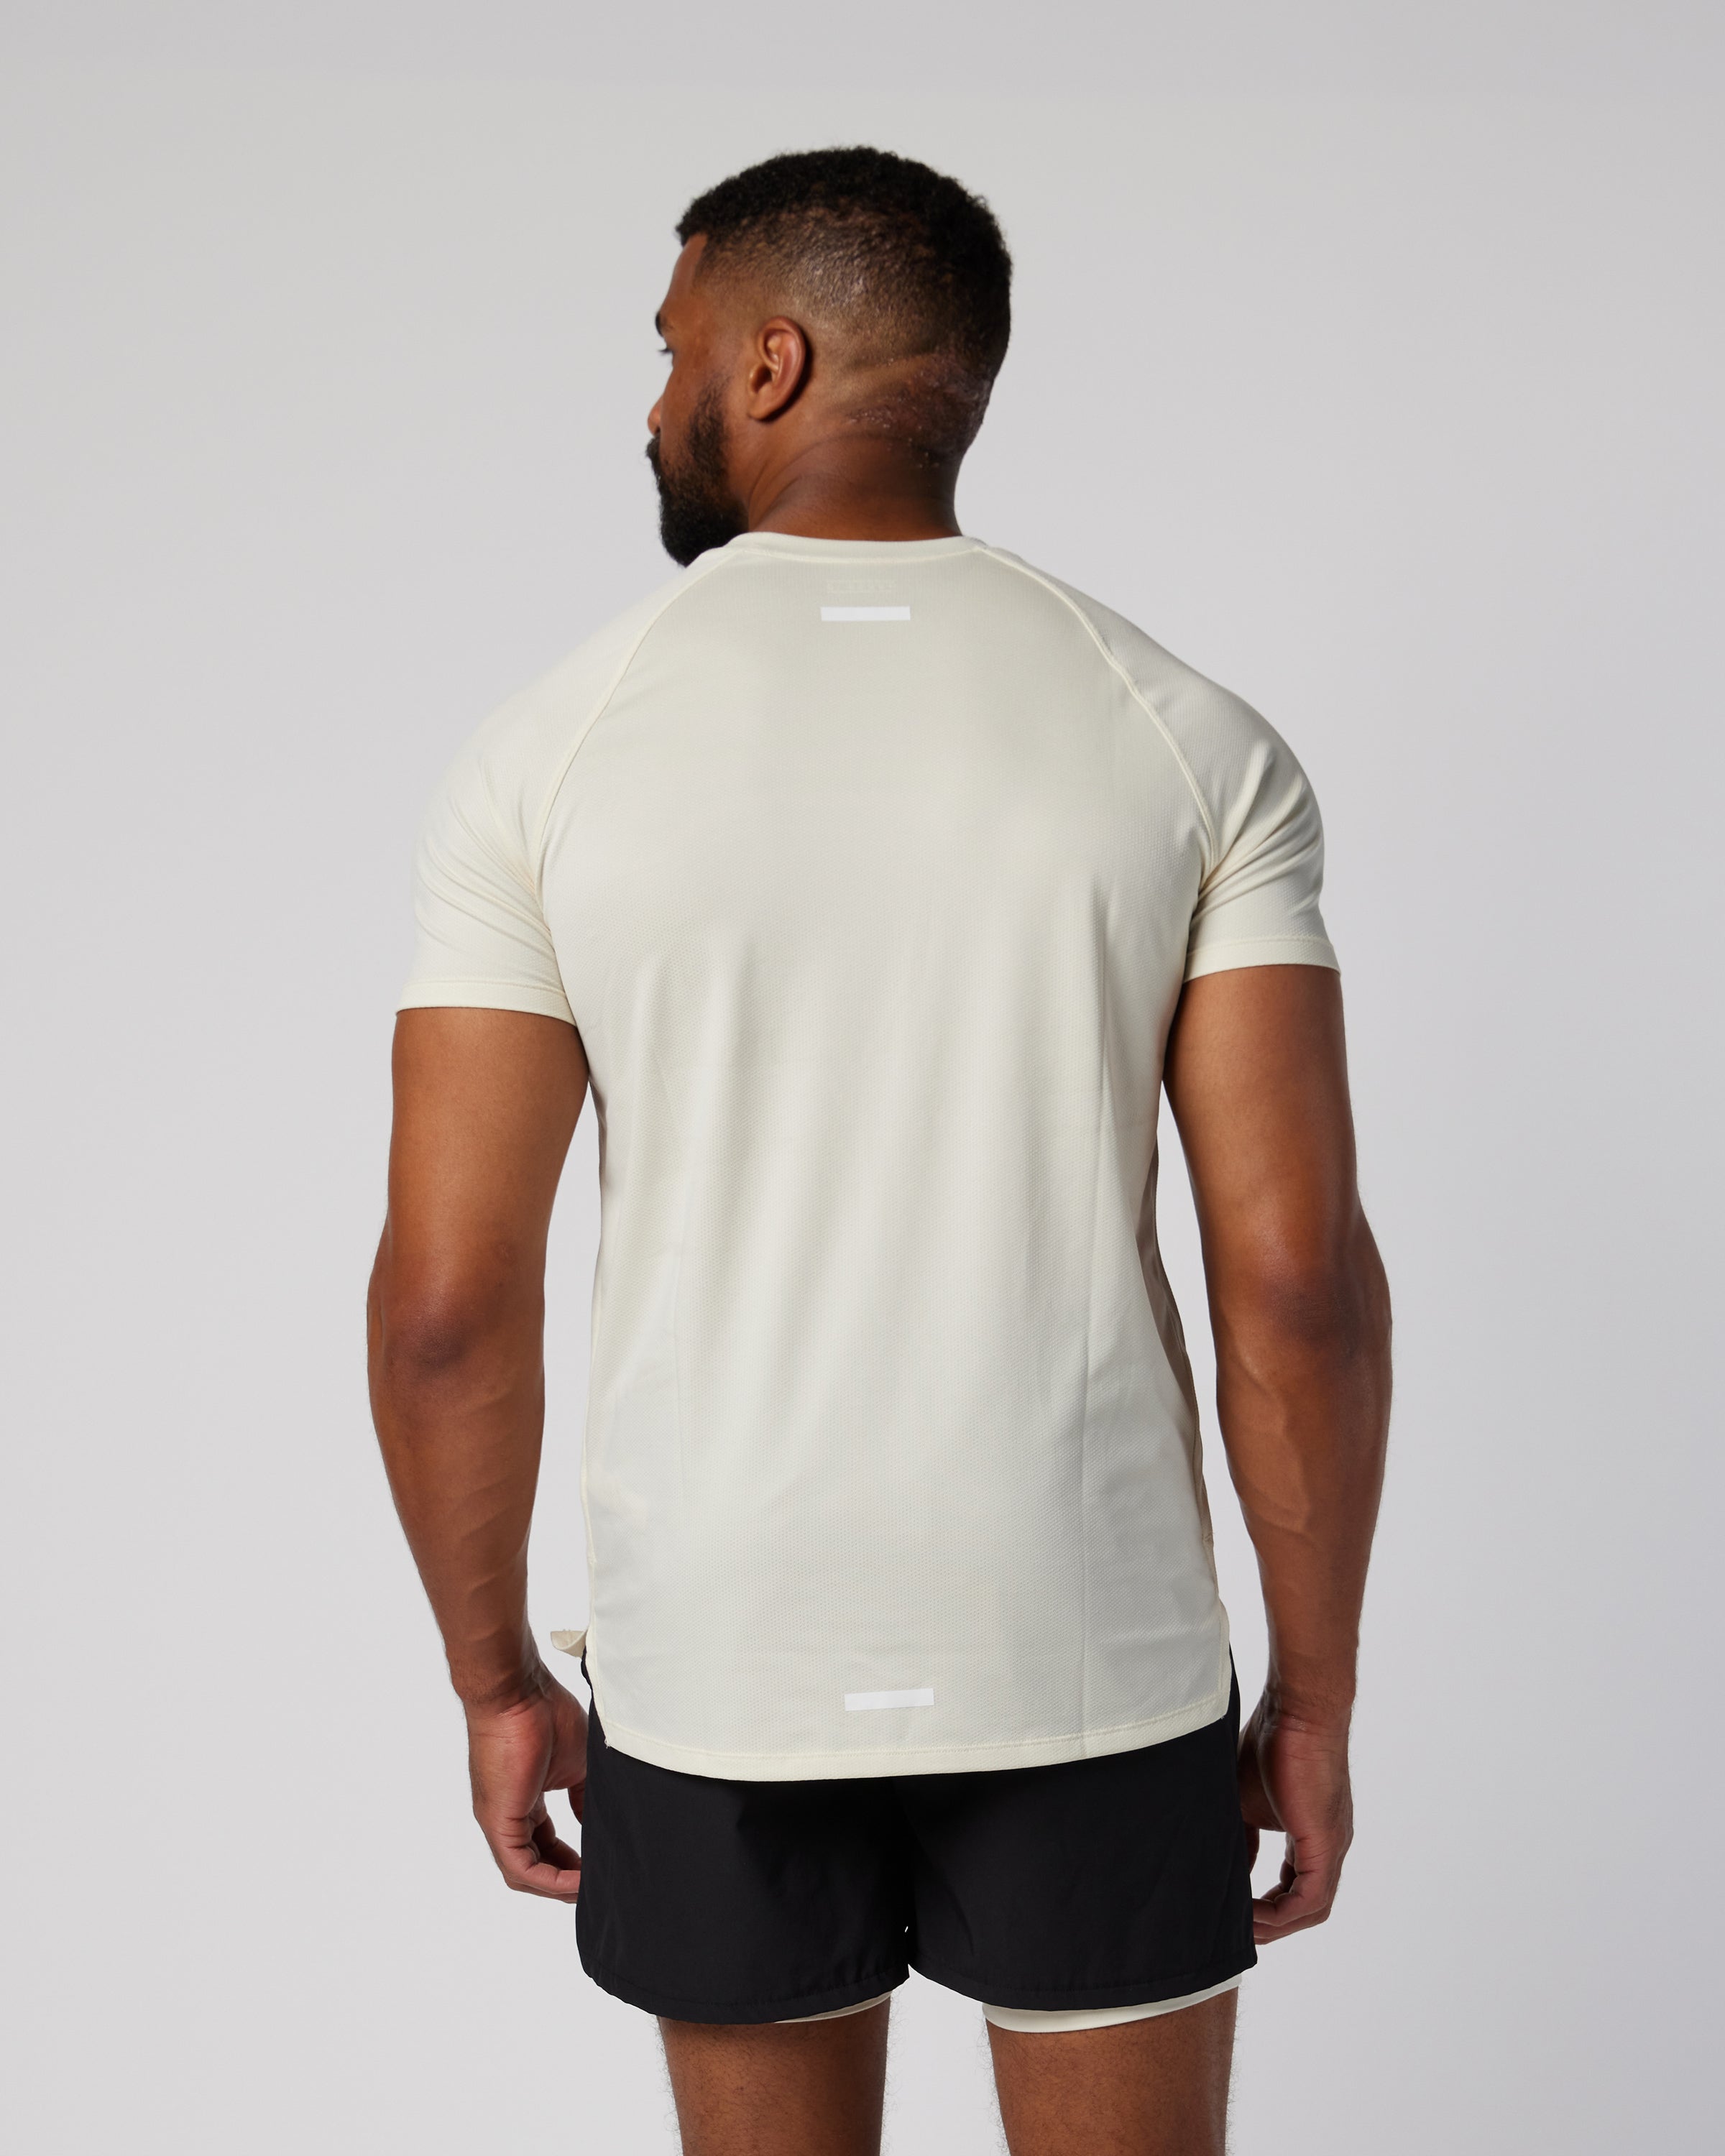 Mens off white athletic t-shirt